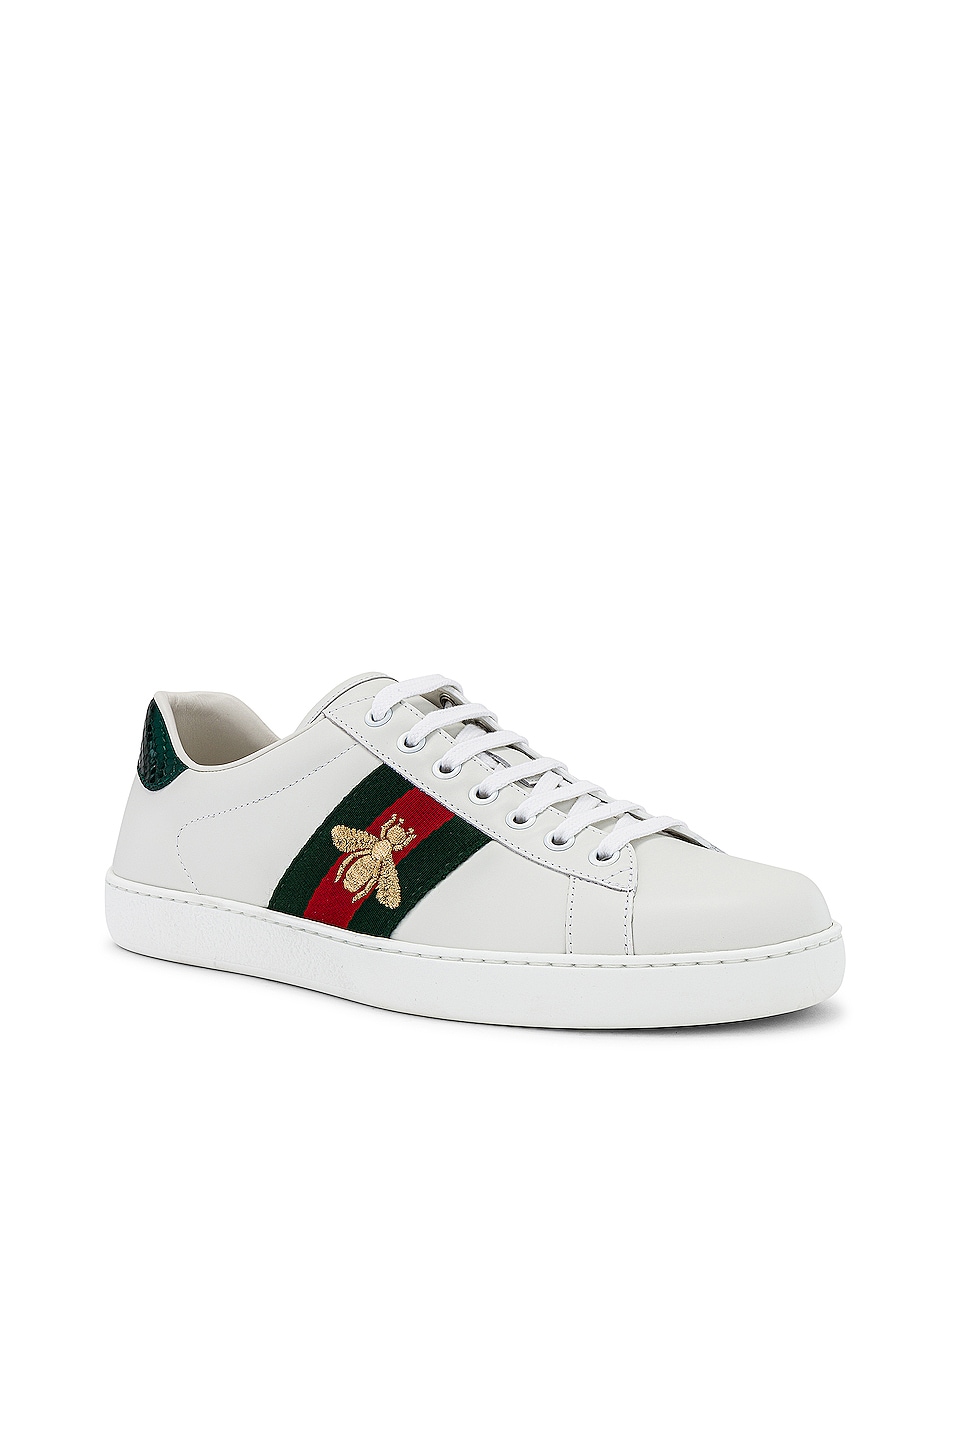 Image 1 of Gucci New Ace Sneaker in White, Red & Green